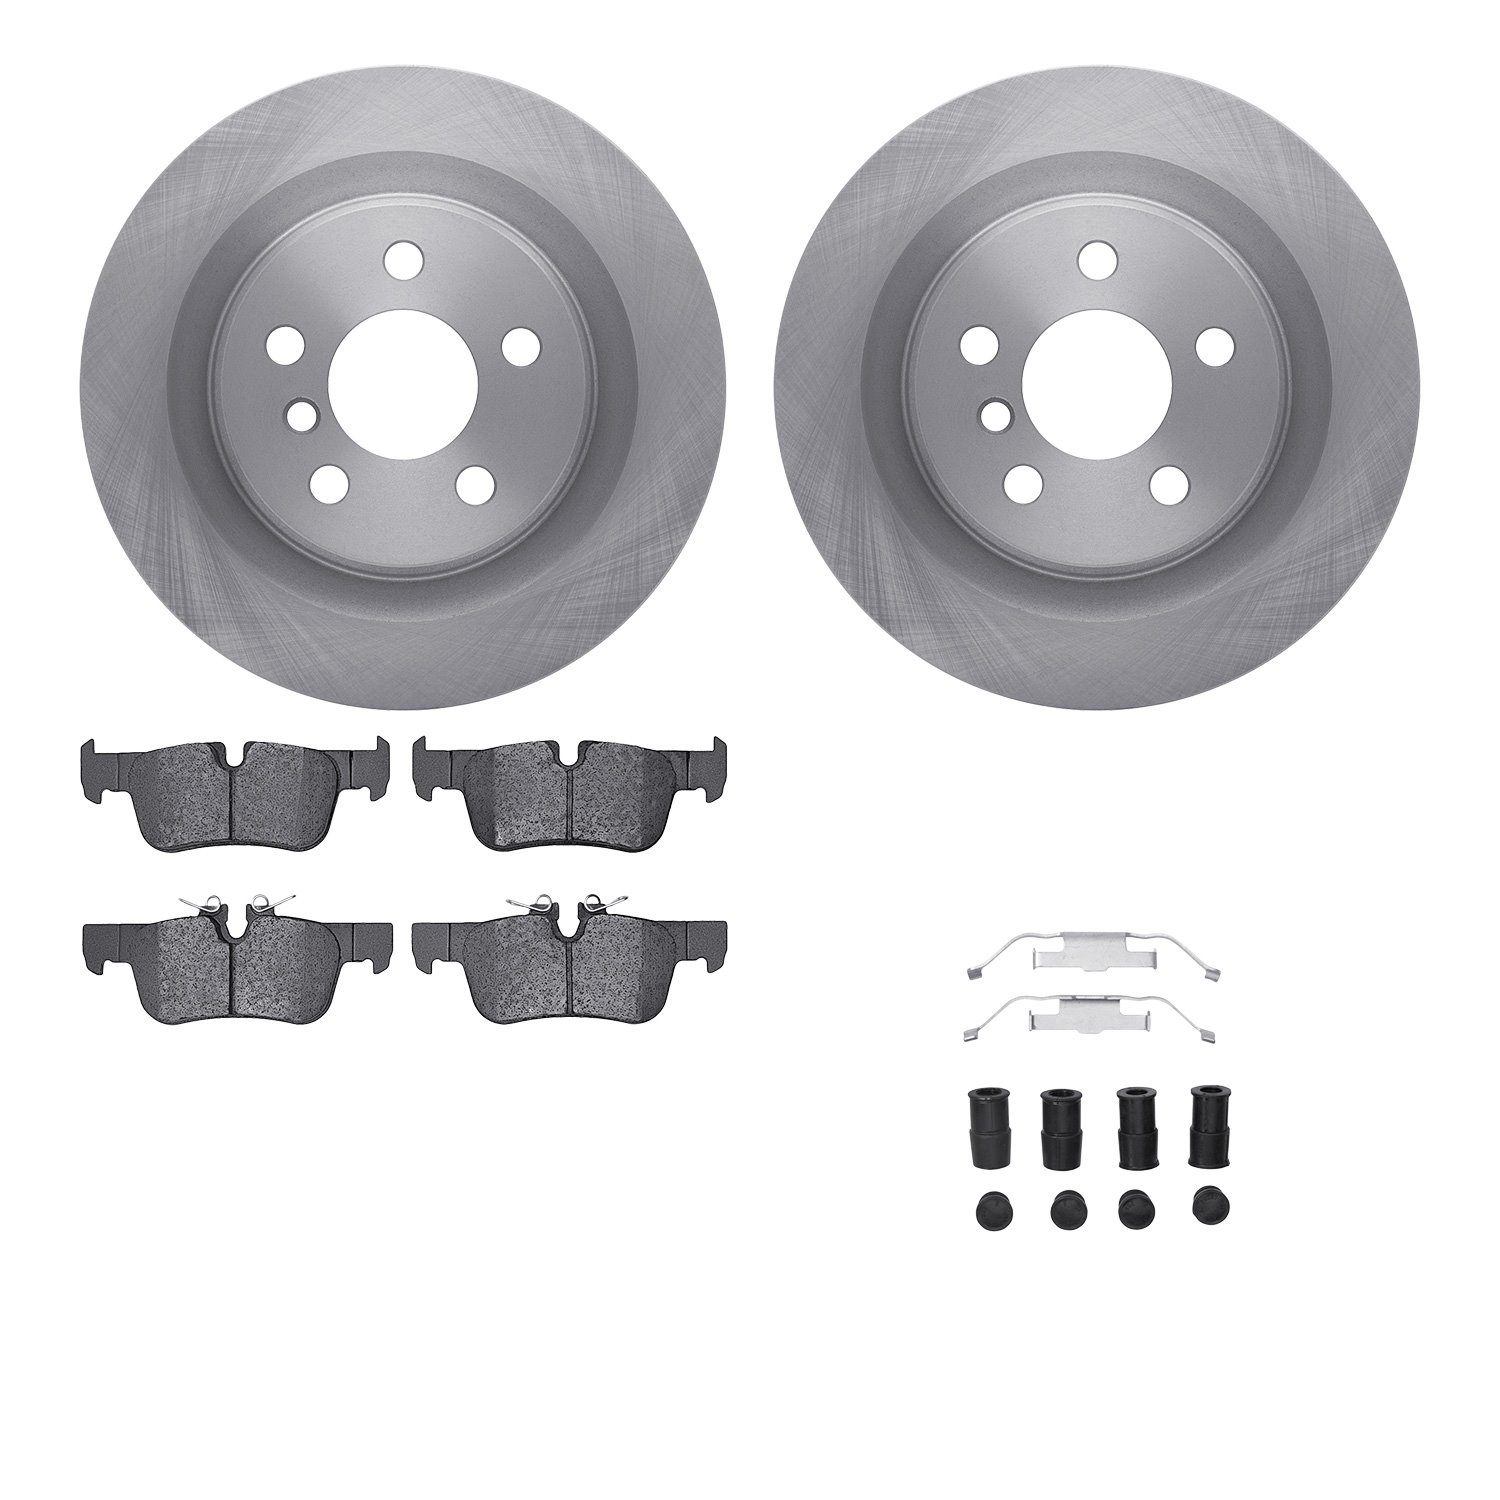 6512-31717 Brake Rotors w/5000 Advanced Brake Pads Kit with Hardware, Fits Select Multiple Makes/Models, Position: Rear